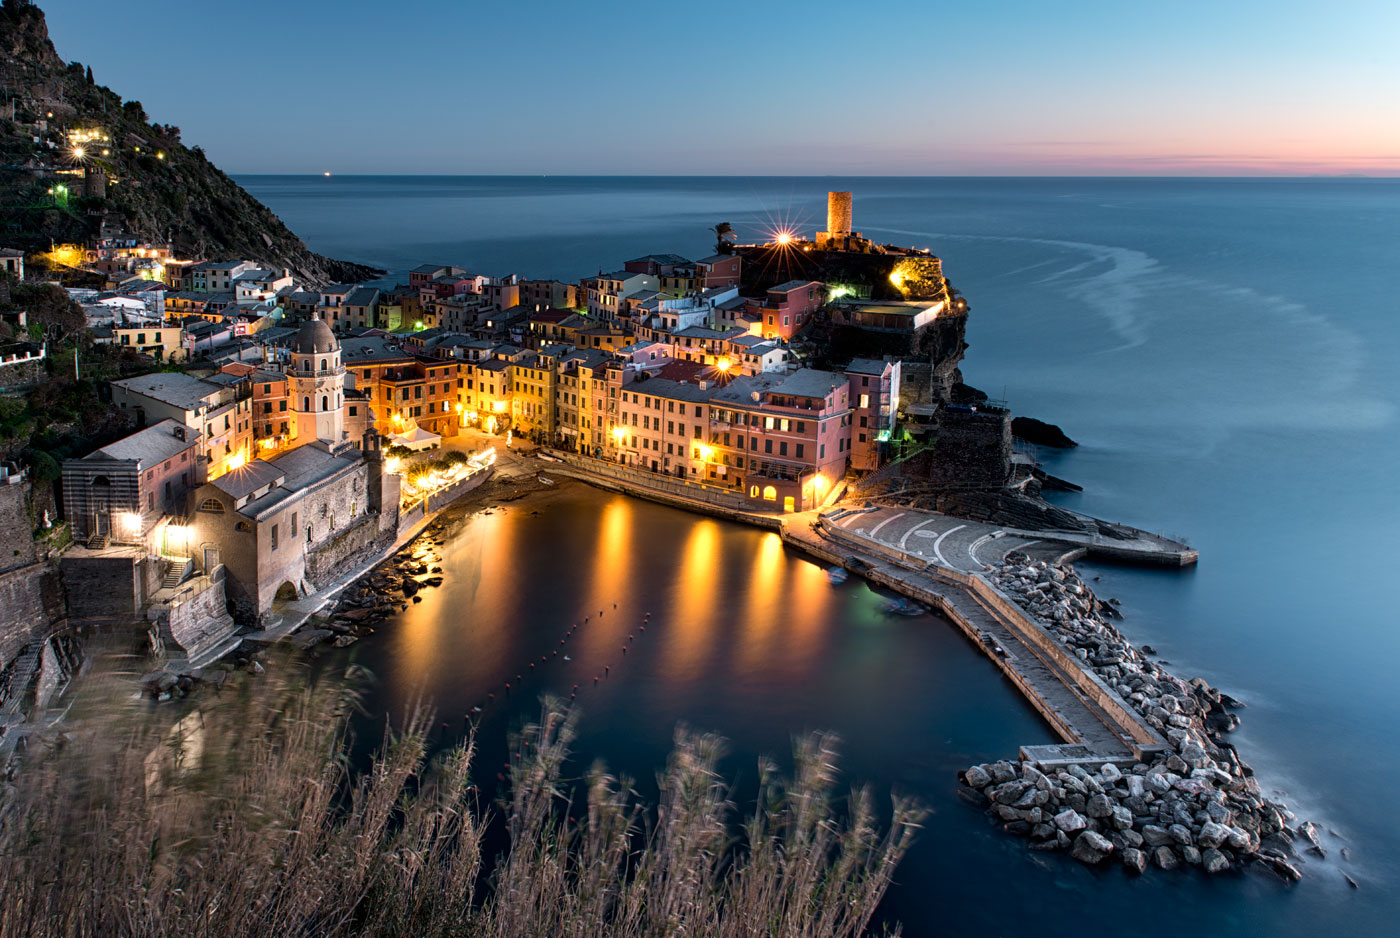 No. 17: Look down to the lovely little town of Vernazza at dusk during off season - Vernazza, Cinque Terre, Italy, 2013